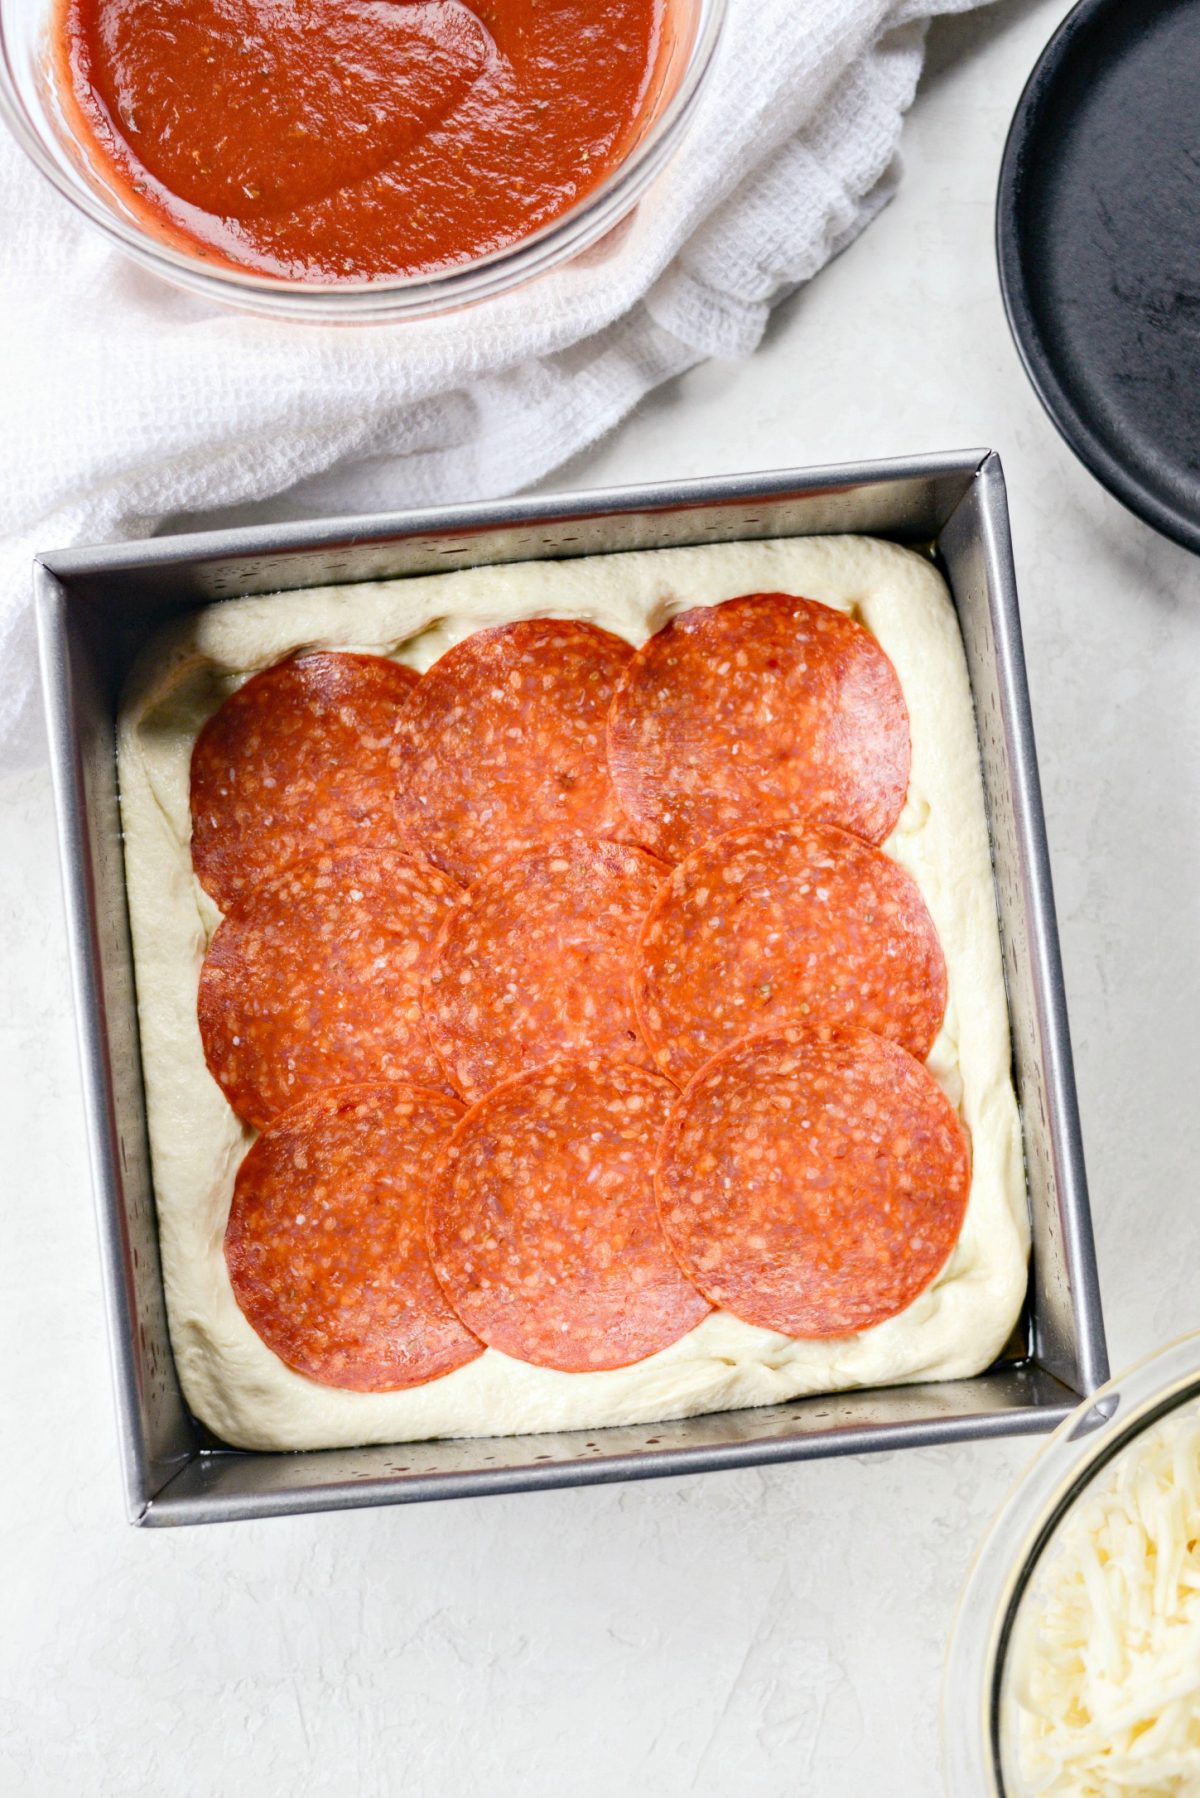 press dough into pan and top with sandwich pepperoni